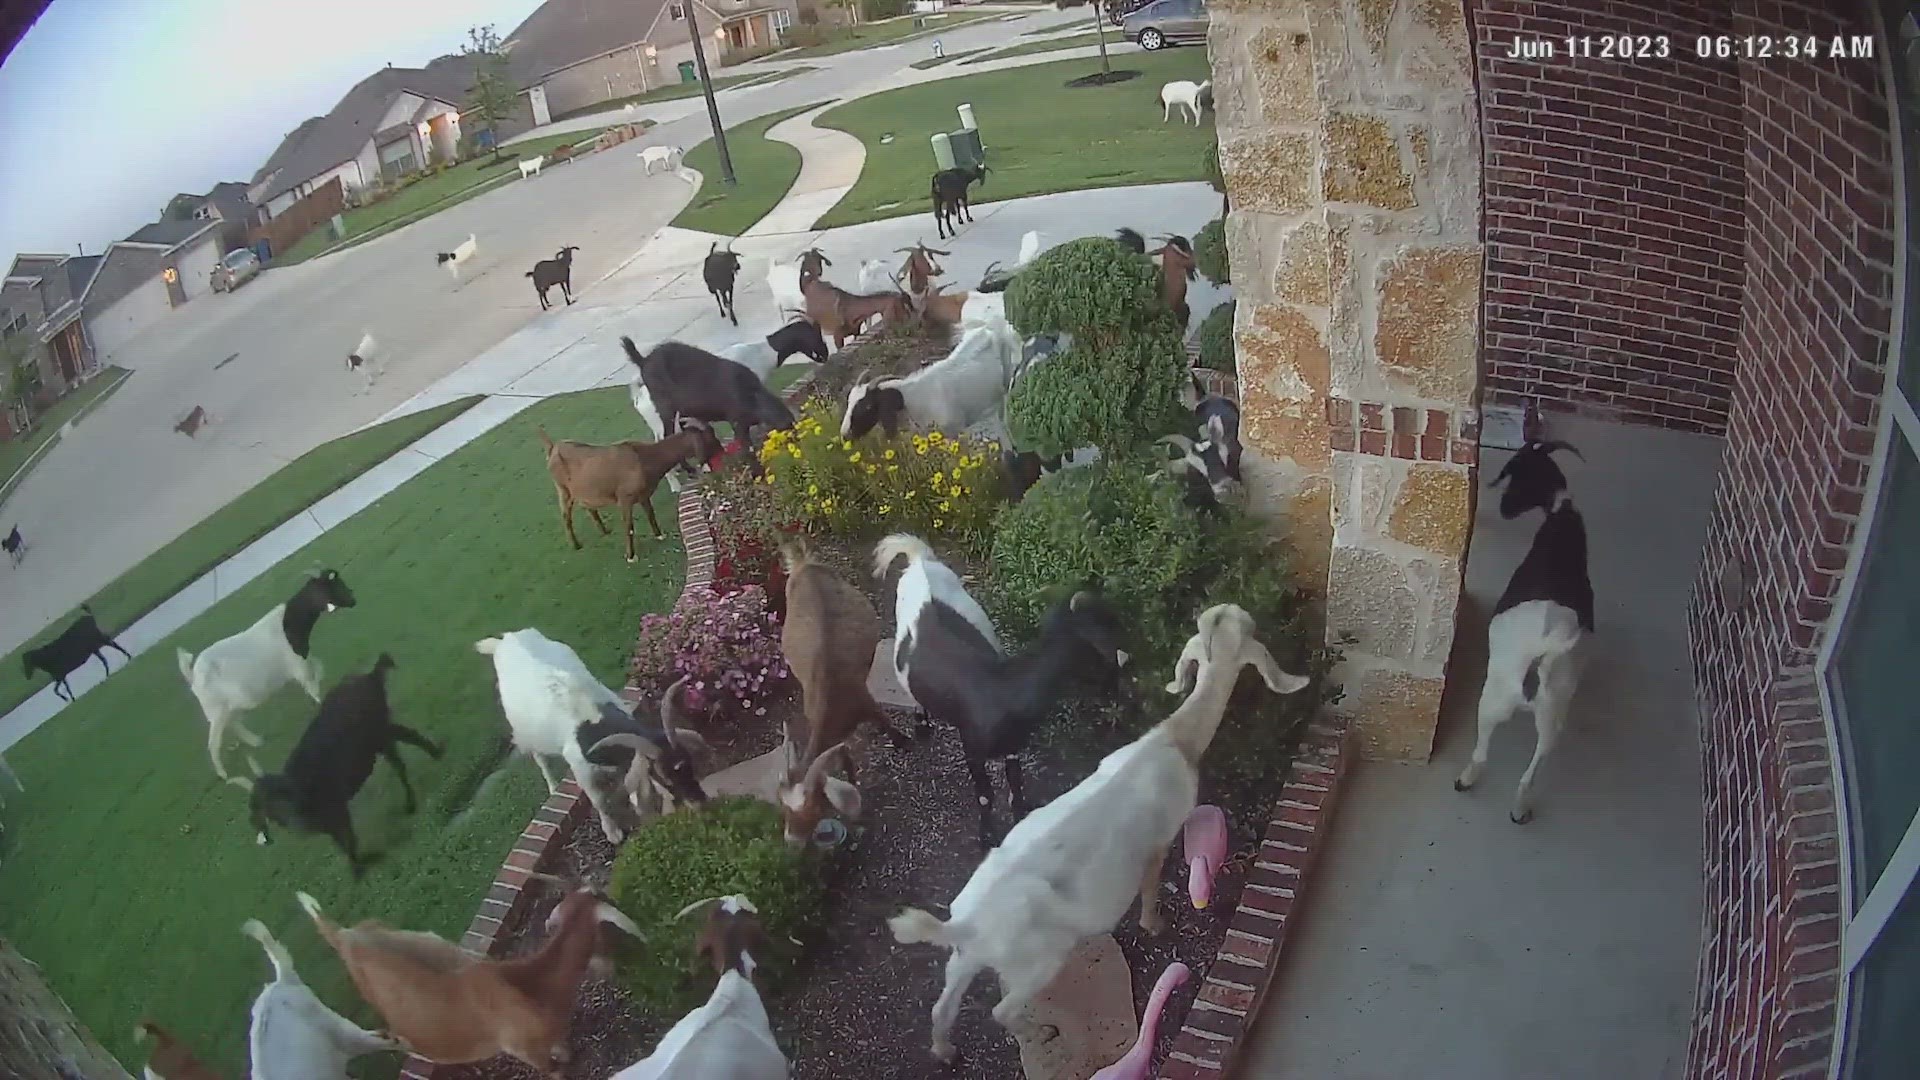 A neighborhood in McKinney, Texas had some surprise -- and hungry -- visitors.